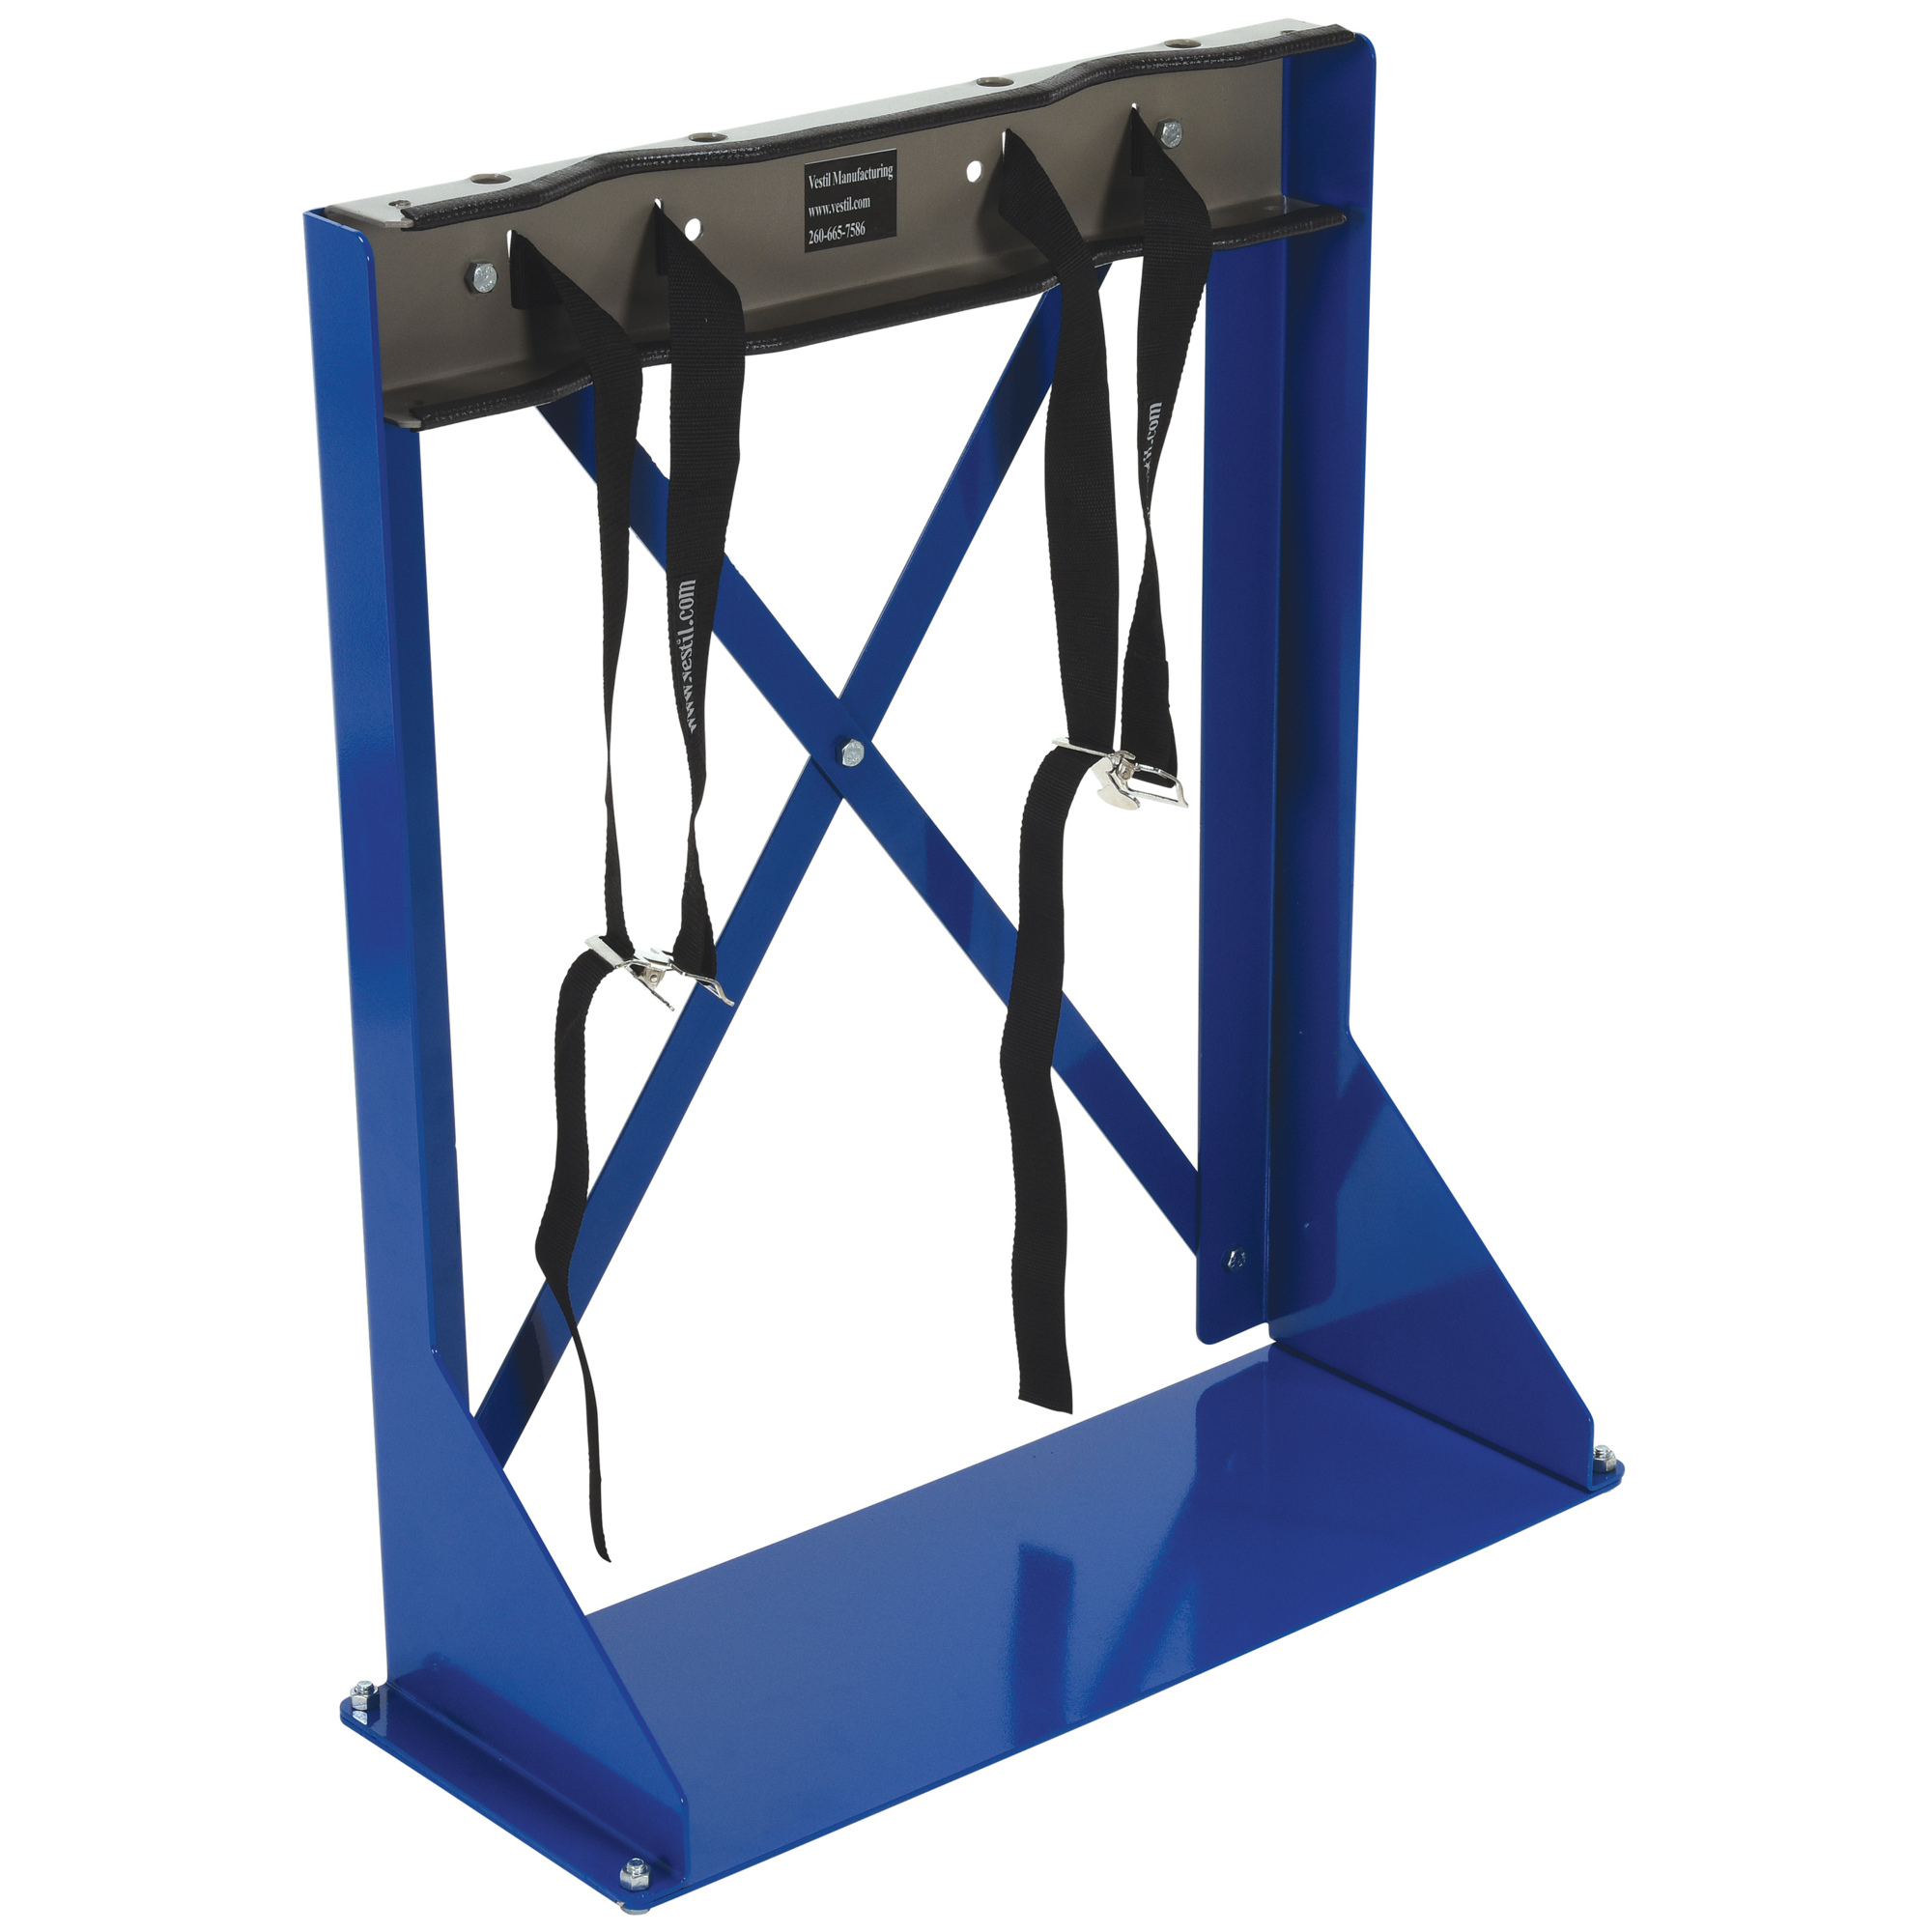 Vestil, 2 cylinder capacity bracket stand blue, Capacity 0 lb, Max. Height 31 in, MInch Height 1 in, Model CB-S-2S